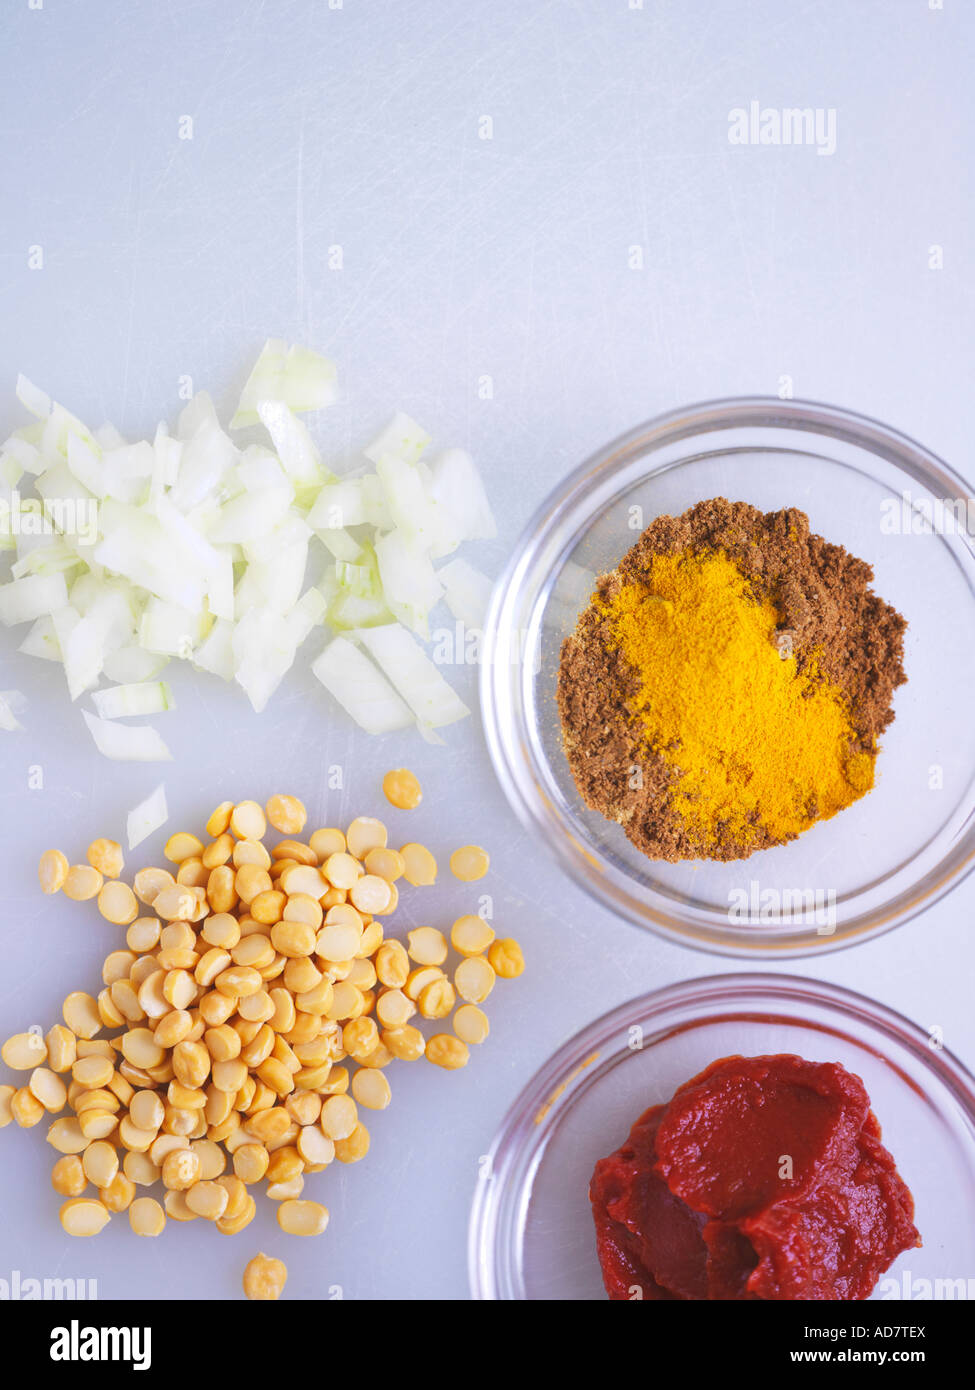 Indian Food Ingredients for Chana Daal Stock Photo